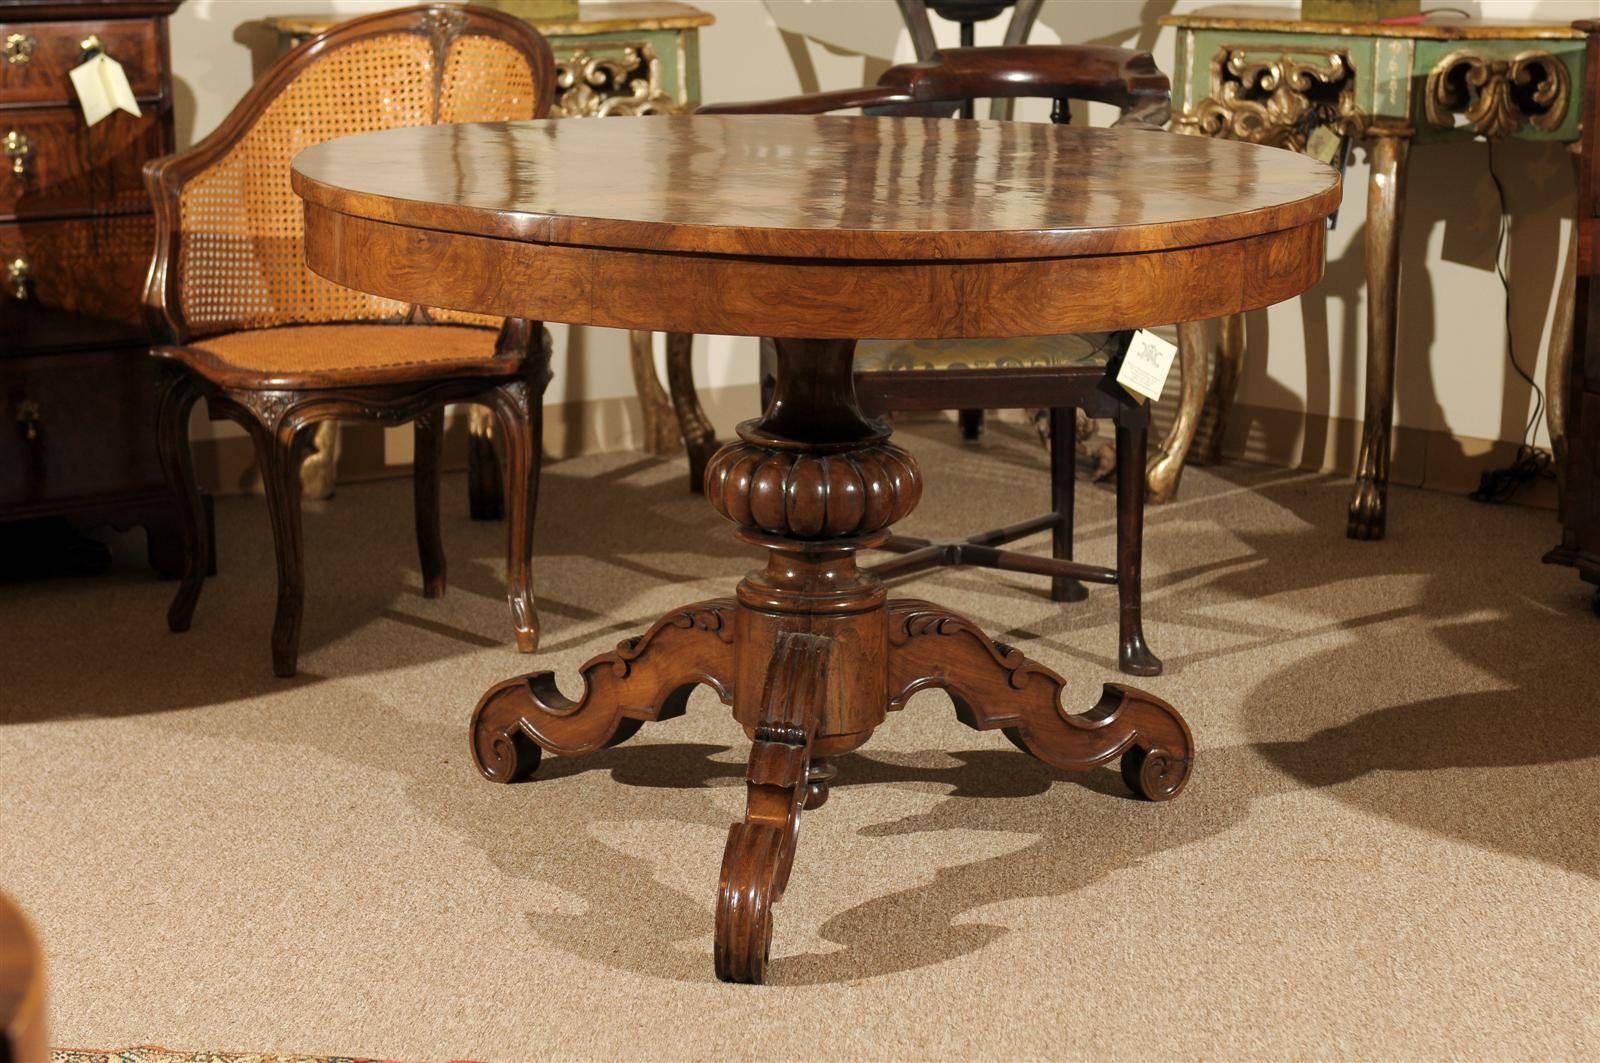 A burled walnut center table with carved tripod base.

